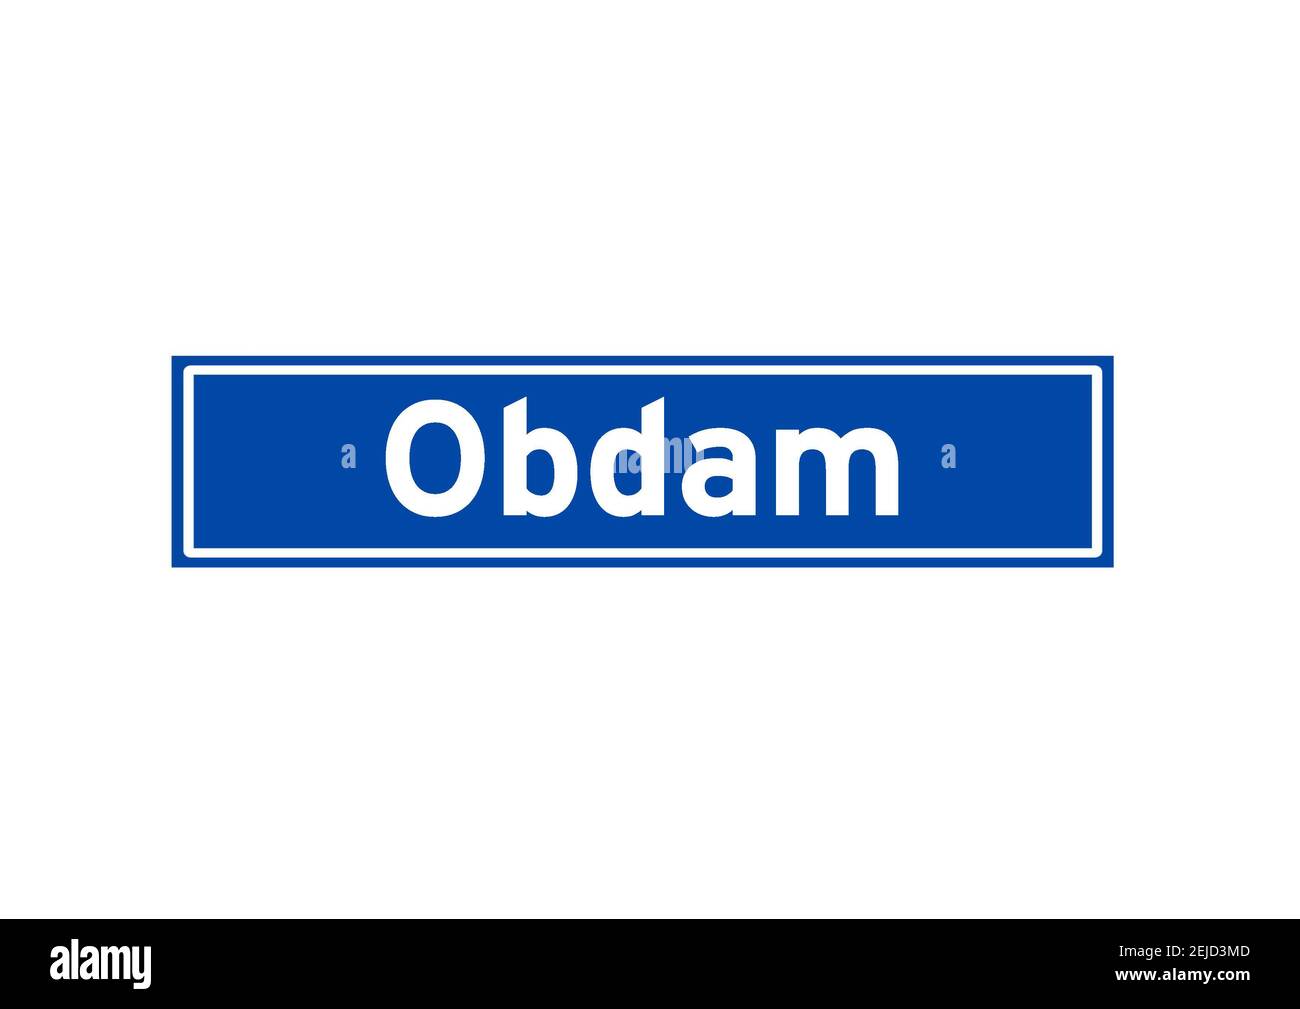 Obdam isolated Dutch place name sign. City sign from the Netherlands. Stock Photo